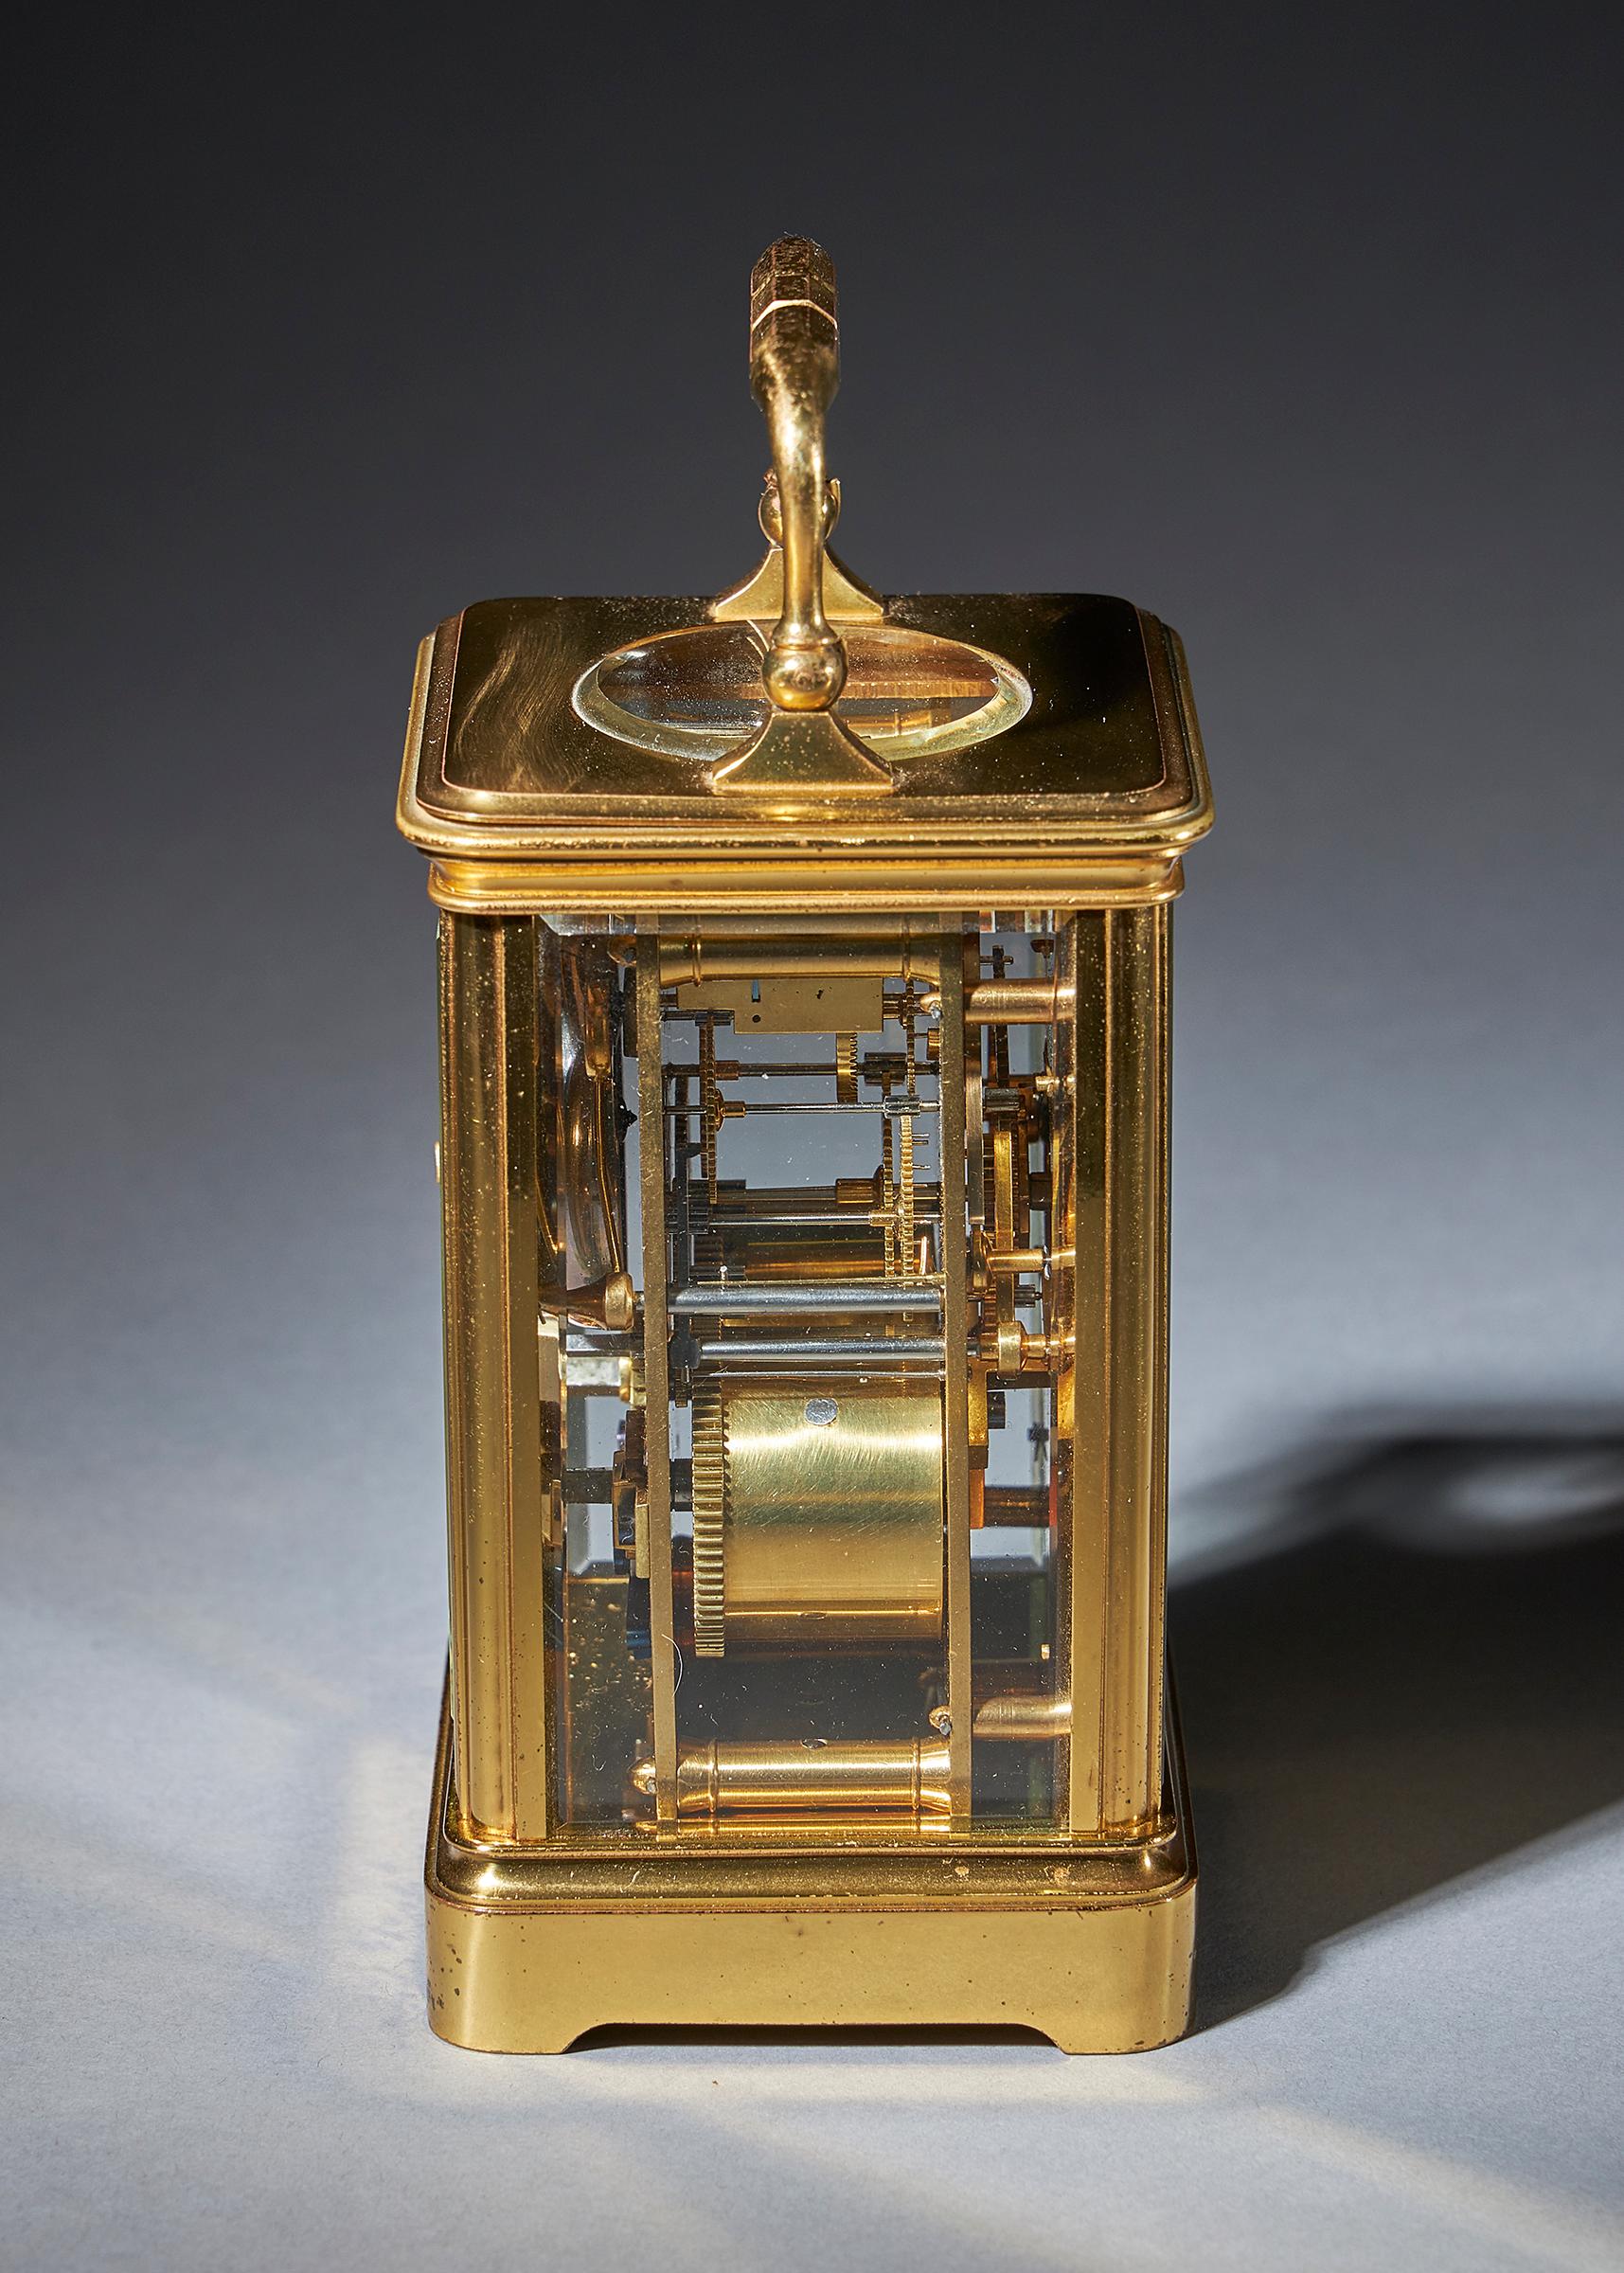 Neoclassical Striking 19th Century Carriage Clock with a Gilt-Brass Corniche Case by Grohé For Sale